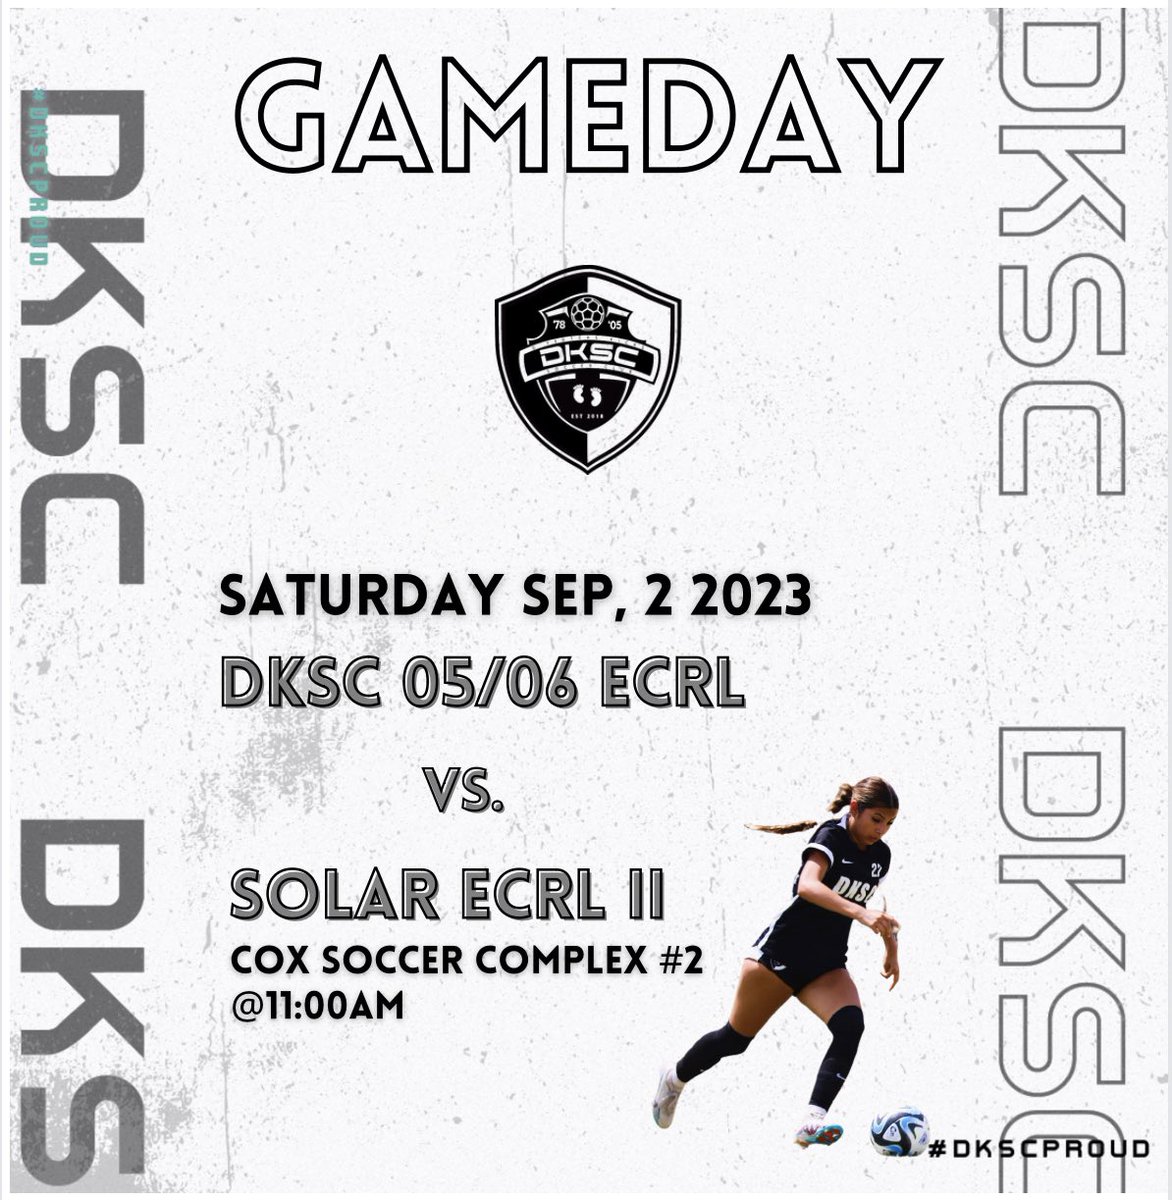 1️⃣ MORE DAY!! Can’t wait to kick of the 1st game of the new season! 
#dksc #NWOSU #dksc06 #collegeball